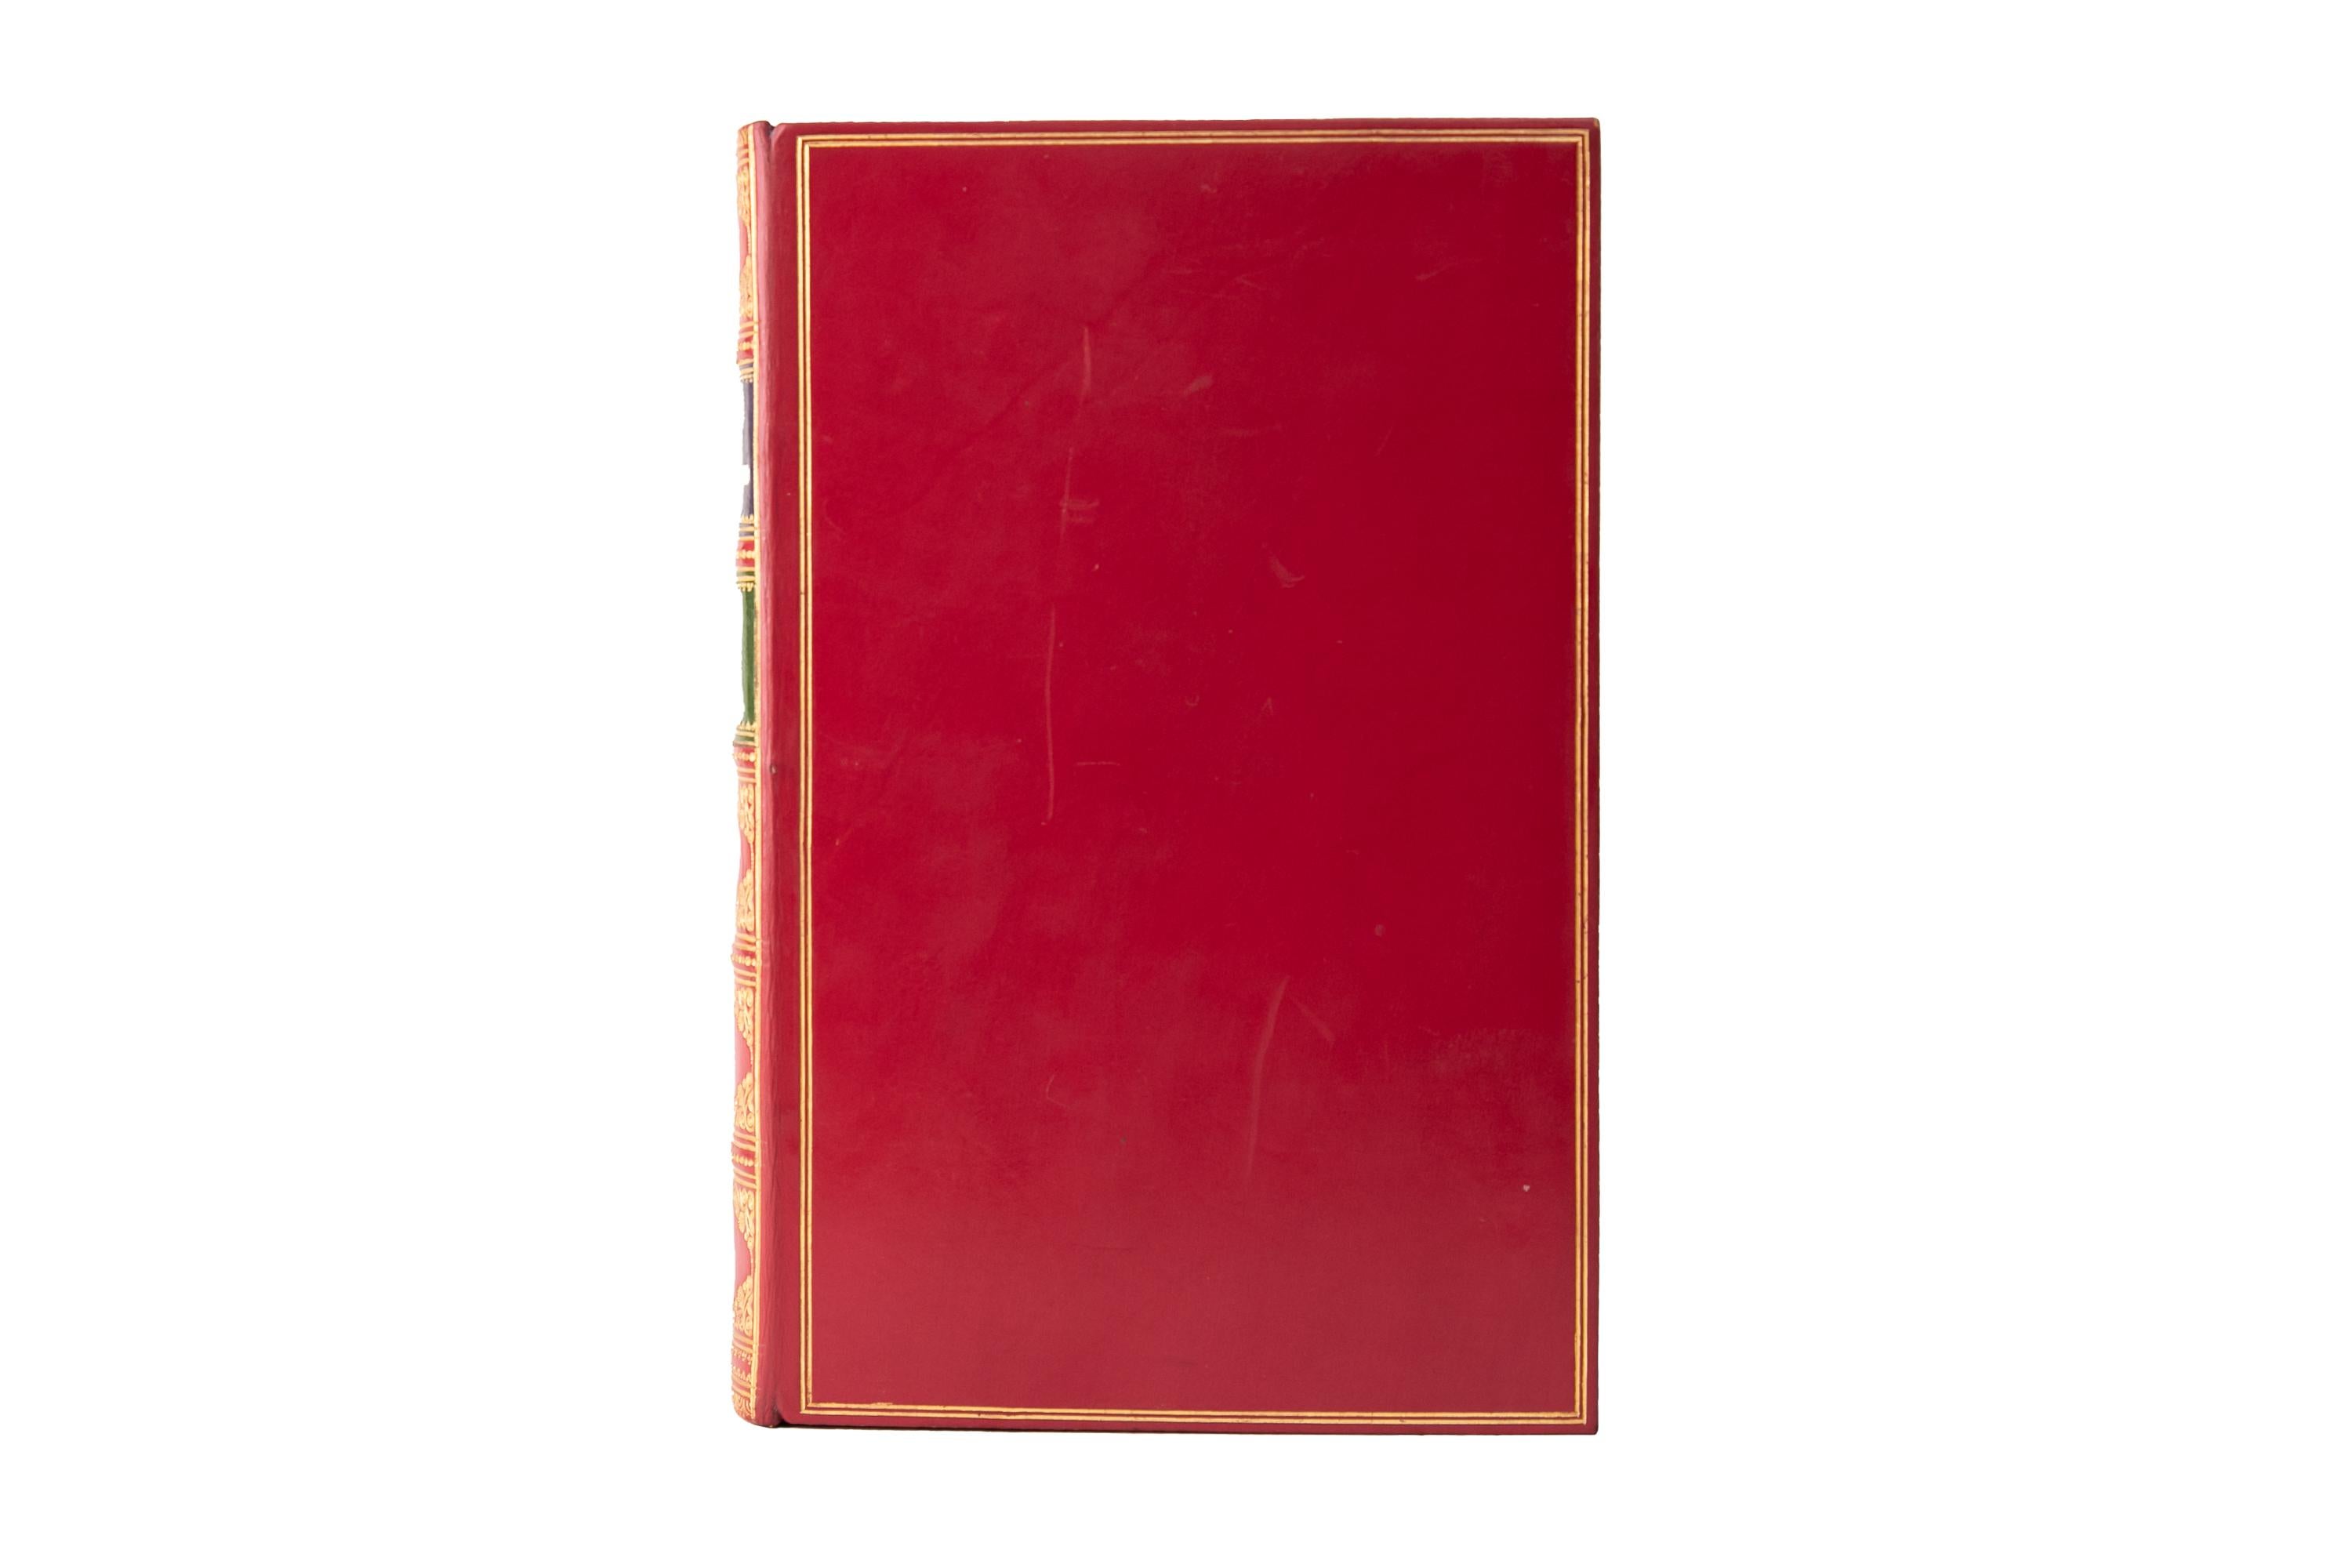 1 Volume. Gilbert Abbott A. Beckett, The Comic History of England. First Edition. Bound by Bayntun in full red calf. The covers and raised band spine are gilt-tooled with green and purple morocco labels. All edges are gilt with gilt-tooled dentelles